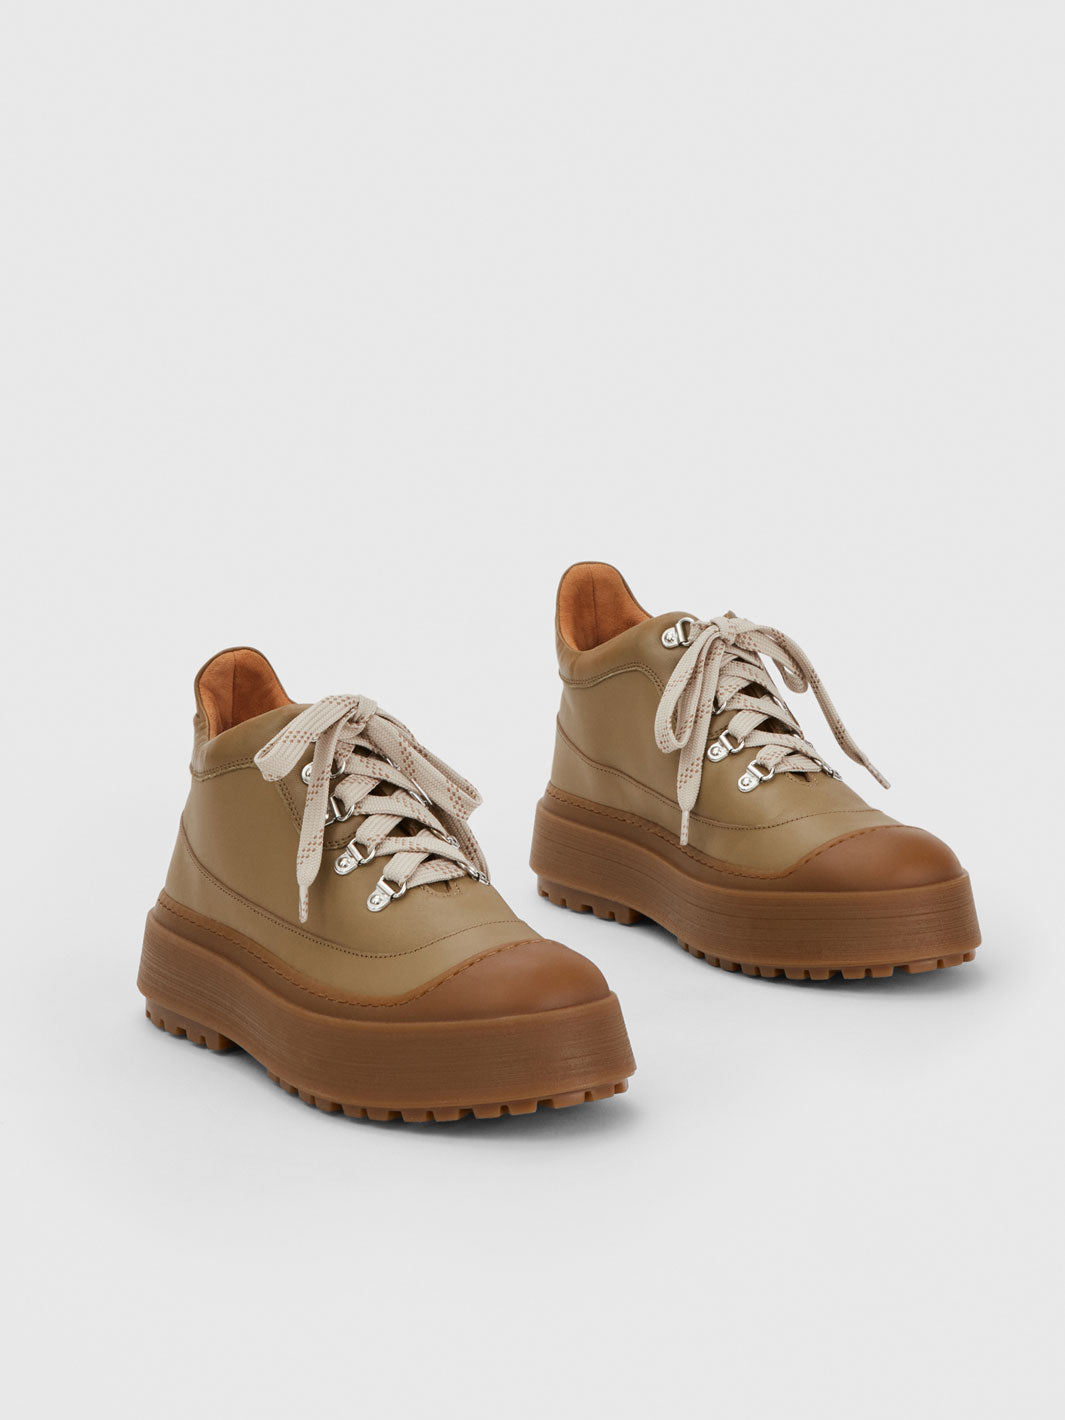 Acerra Moss Leather/Nappa Hiking shoes